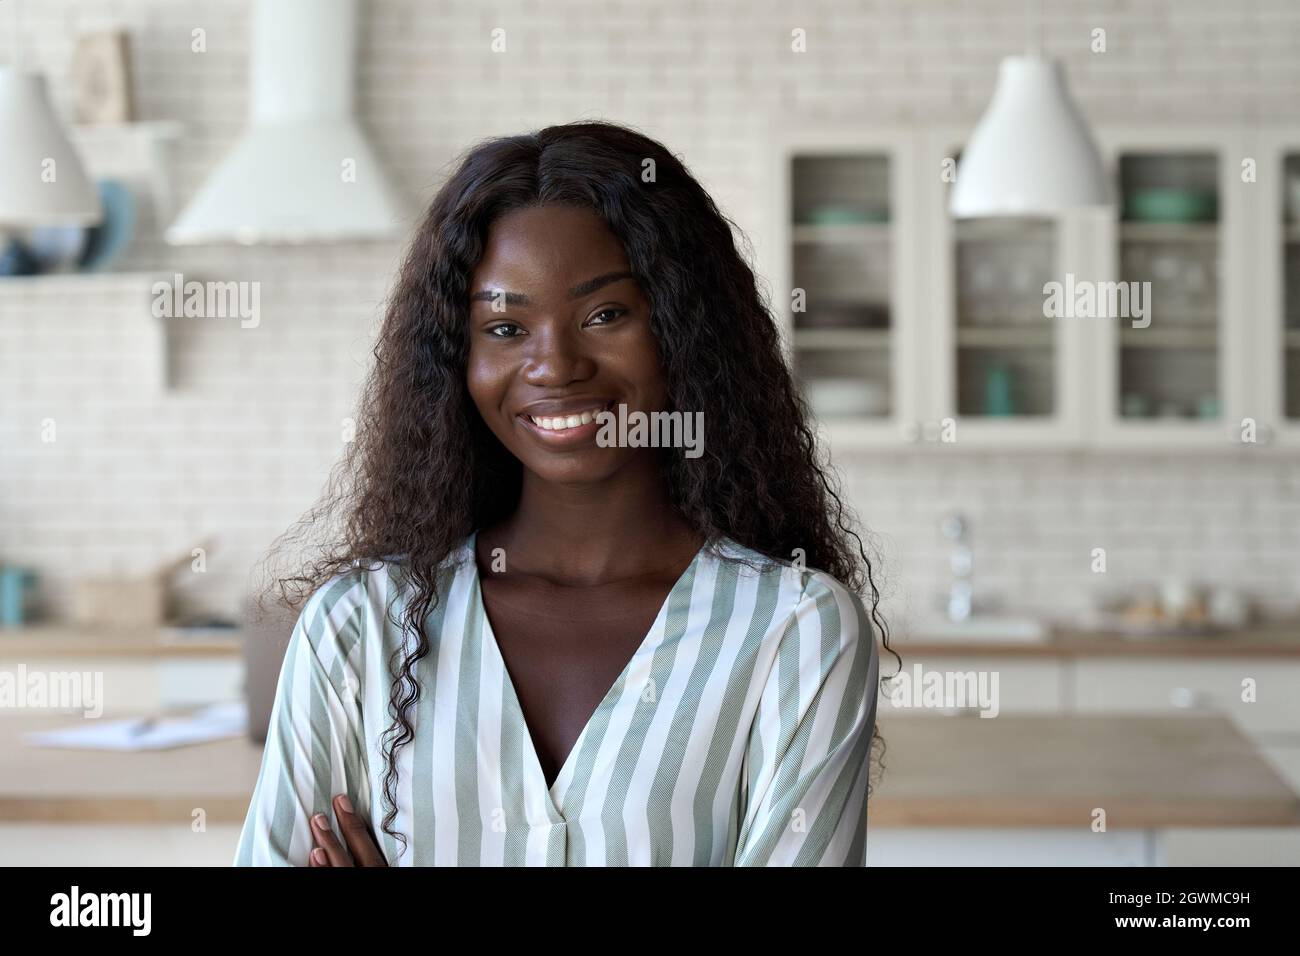 Headshot portrait of young black woman looking at camera indoors. Stock Photo